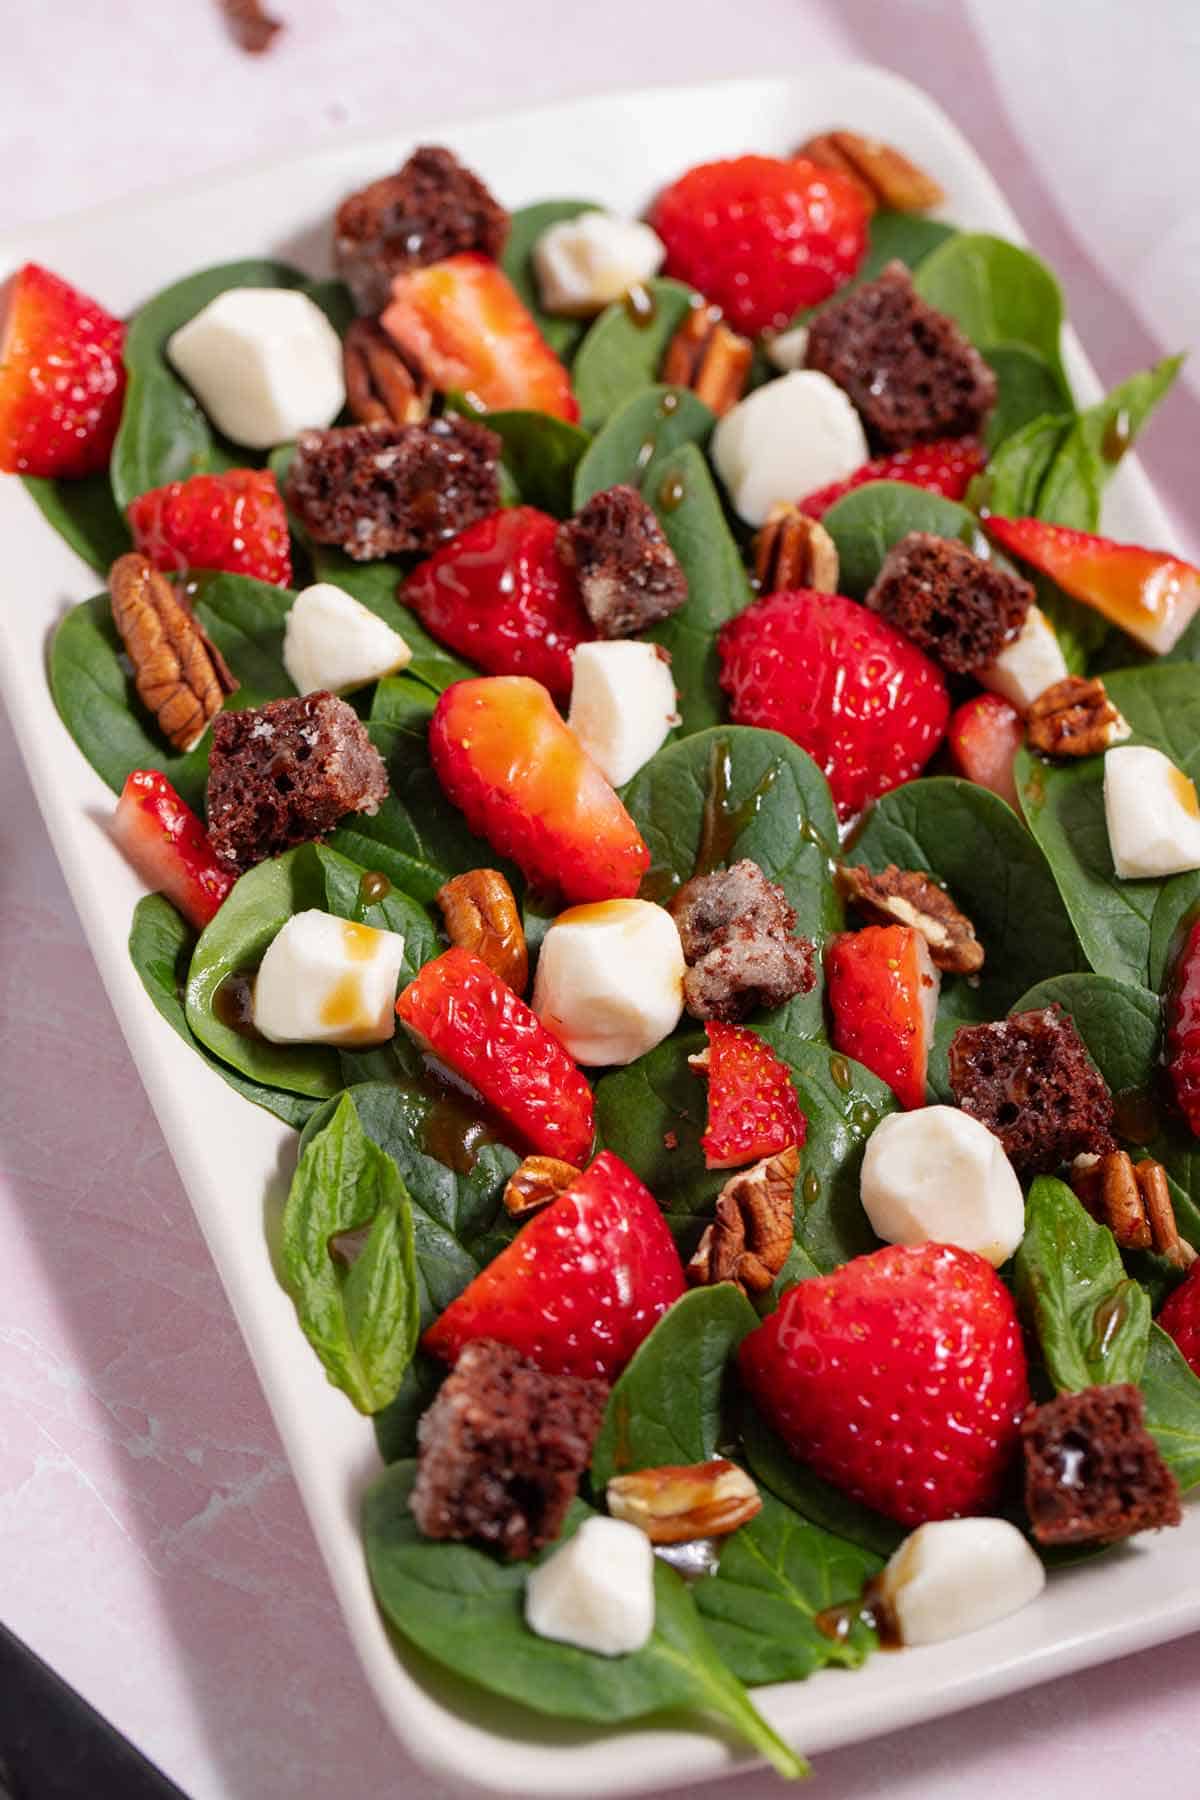 Spinach strawberry salad with chocolate cake croutons.